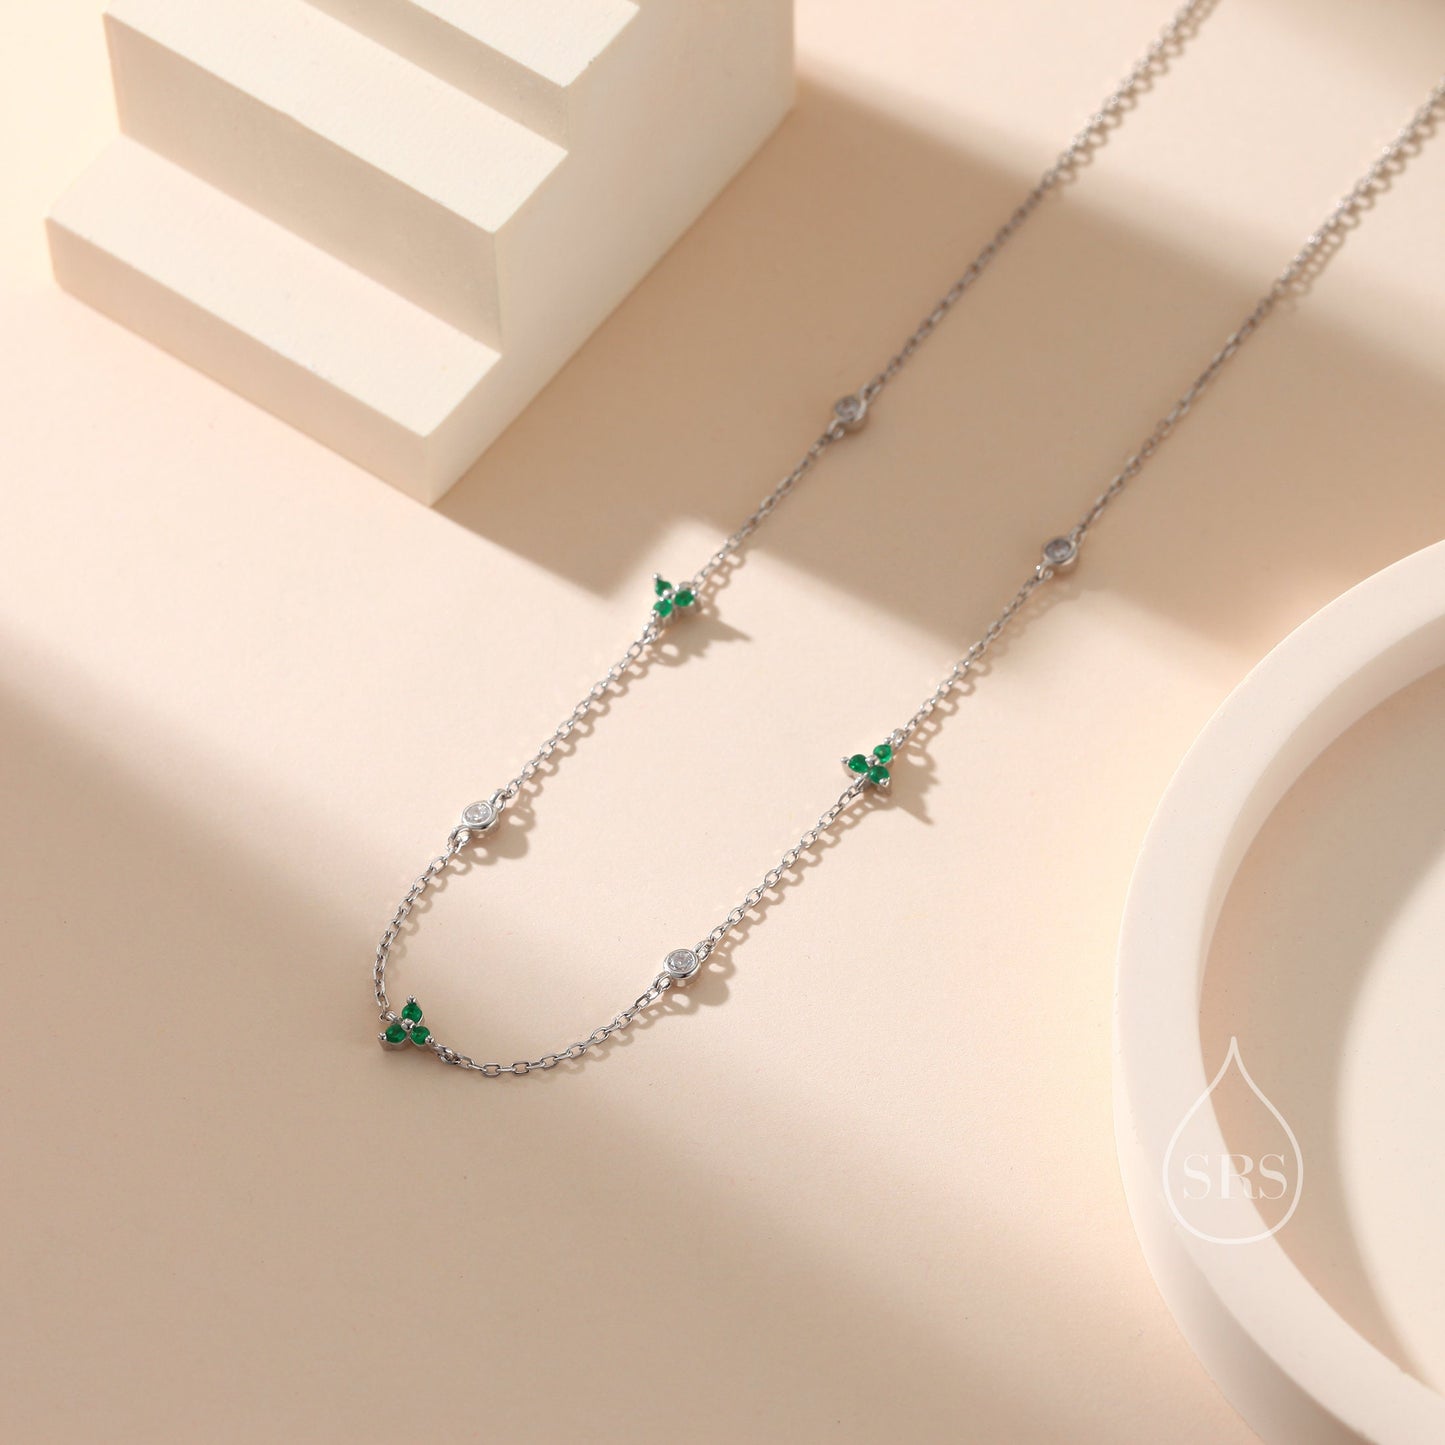 CZ Trio Necklace in Sterling Silver, Silver or Gold, Emerald Green or Clear Three CZ  Satellite Crystal Necklace, Solid Silver Necklace